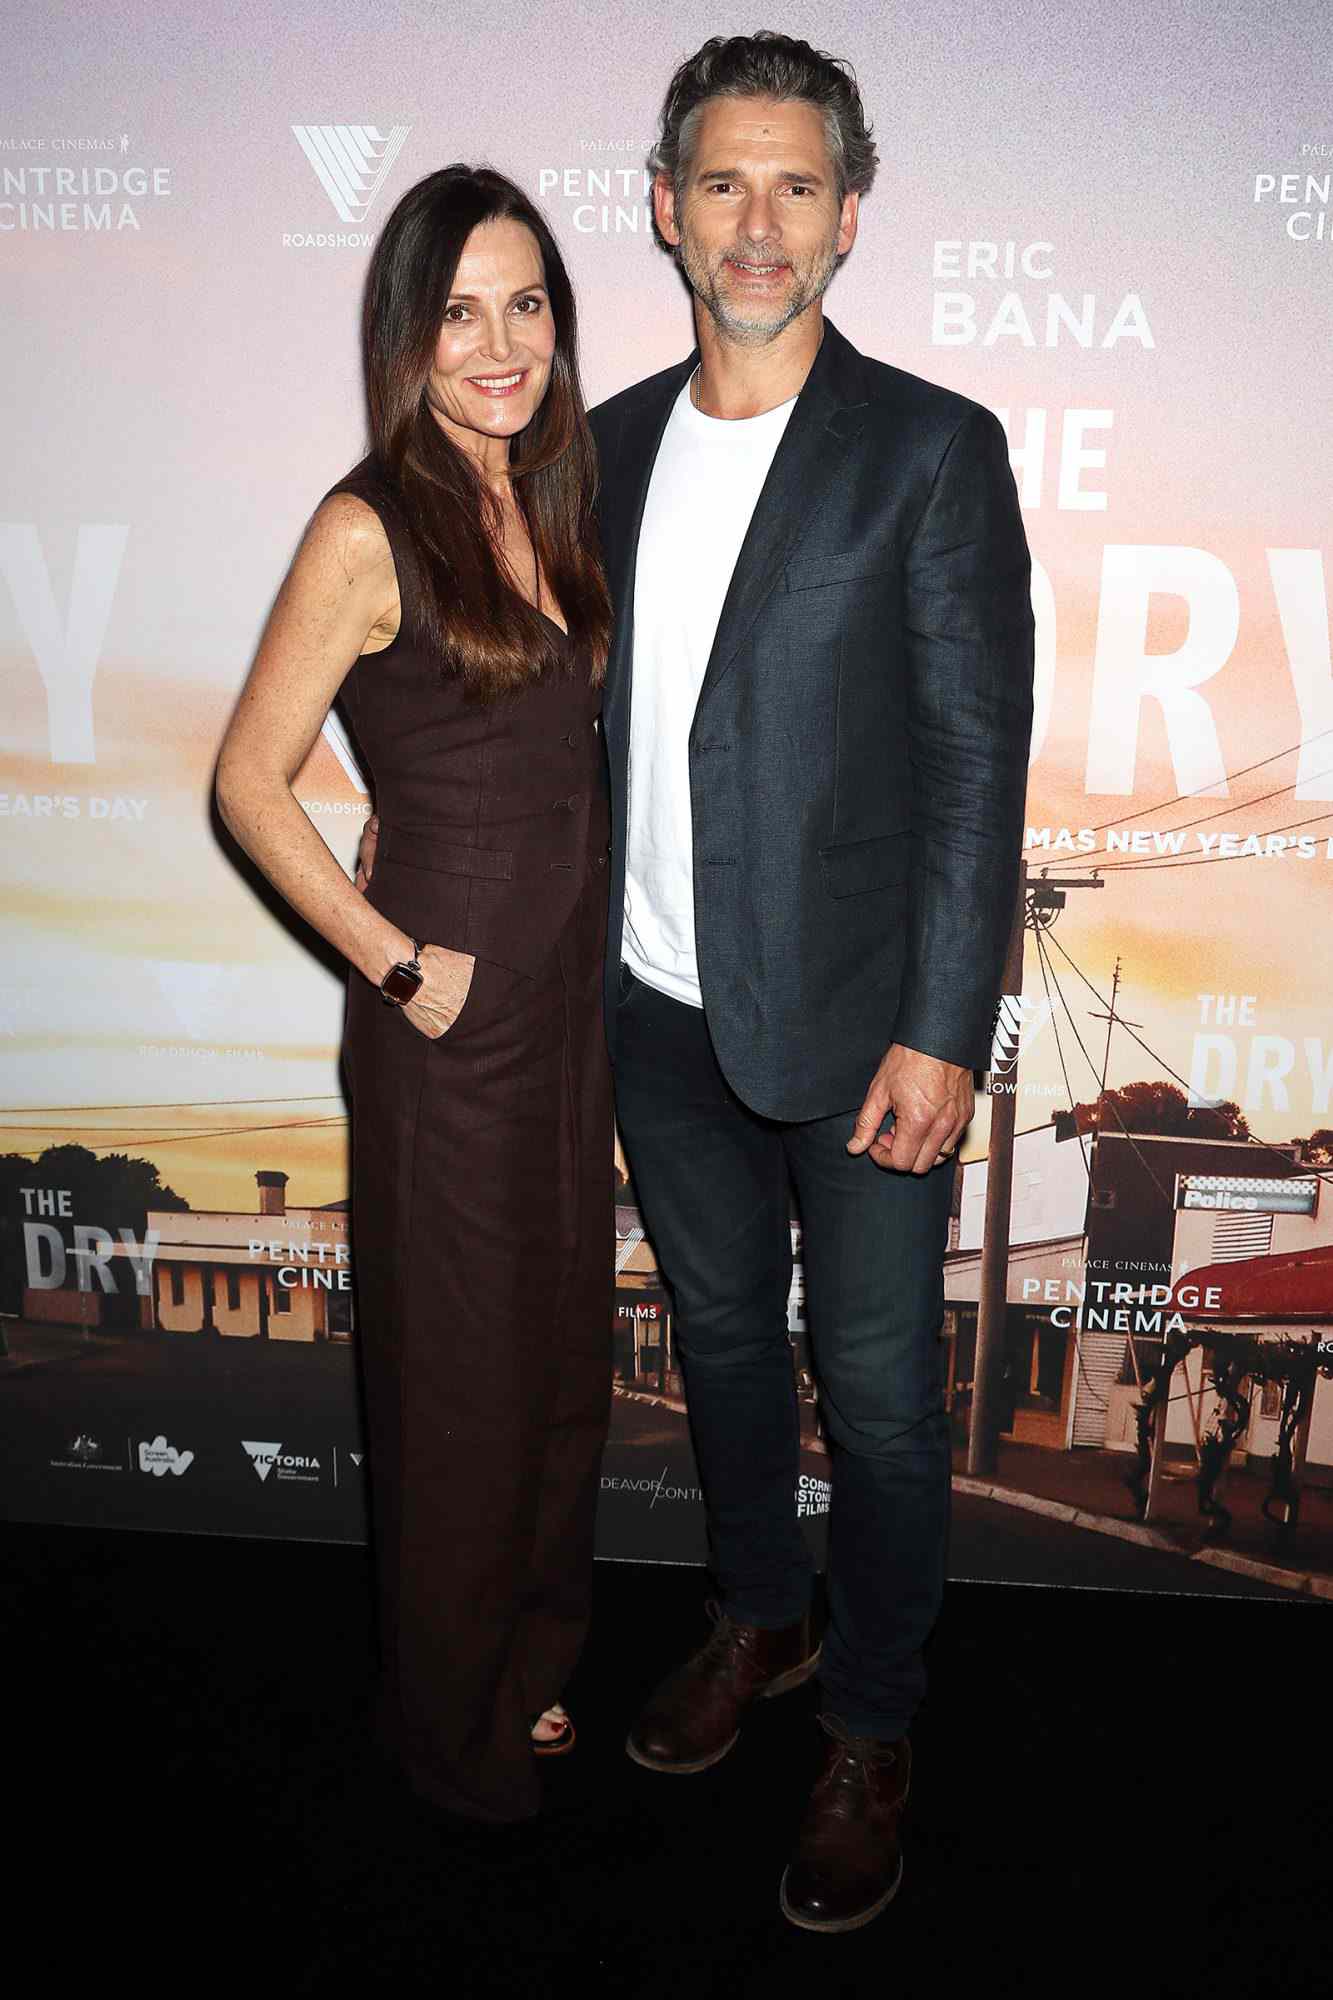 Eric Bana (R) and his wife Rebecca Bana attend the Australian premiere of The Dry at Pentridge Cinema on December 11, 2020